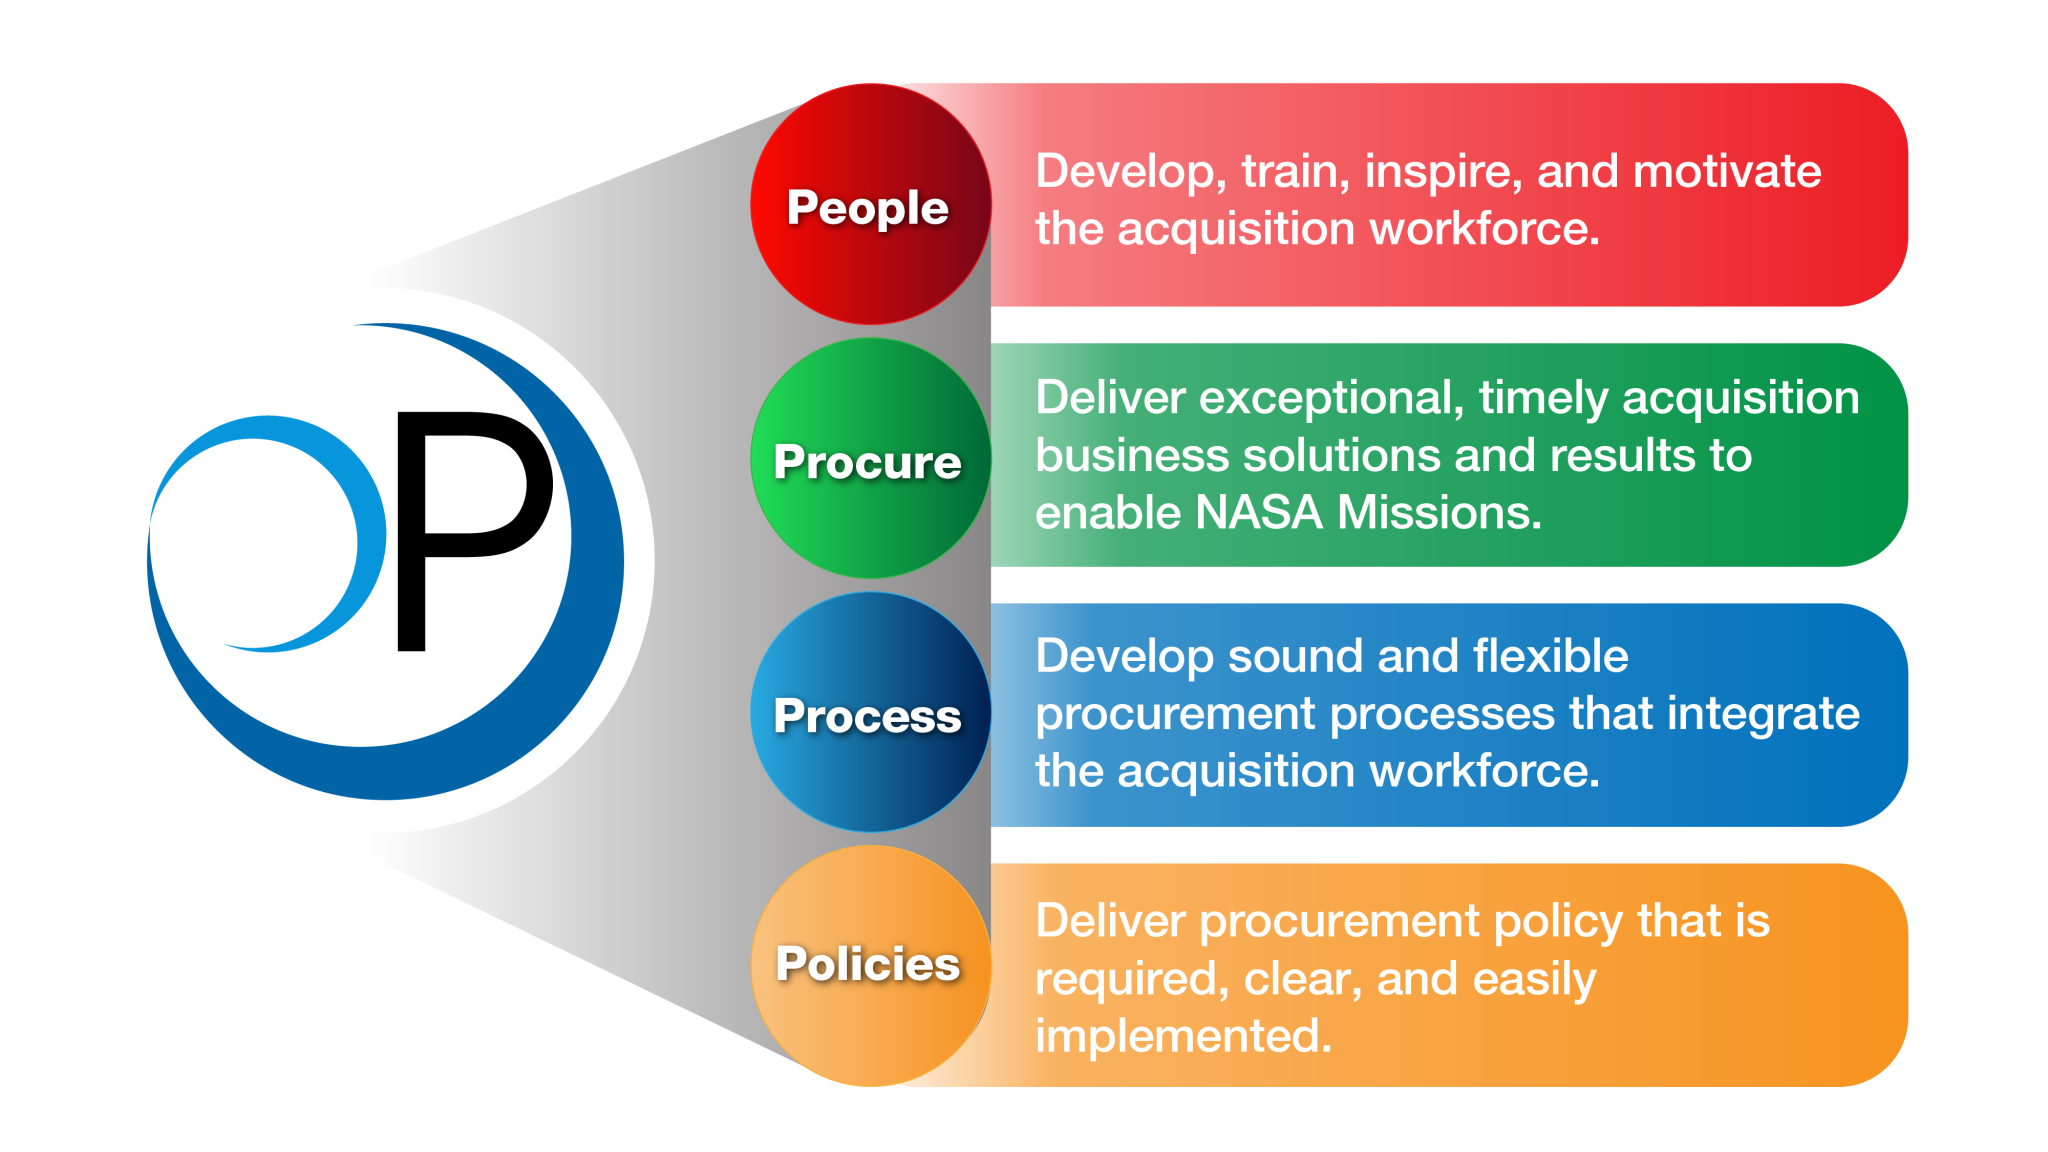 Office of Procurement 4 P's: People-Develop, train, inspire, and motivate the acquisition workforce, Procure - Deliver exceptional, timely acquisition business solutions and results to enable NASA missions, Process - Develop sound and flexible procurement processes that integrate the acquisition workforce, Policies - Deliver procurement policy that is required, clear, and easily implemented.